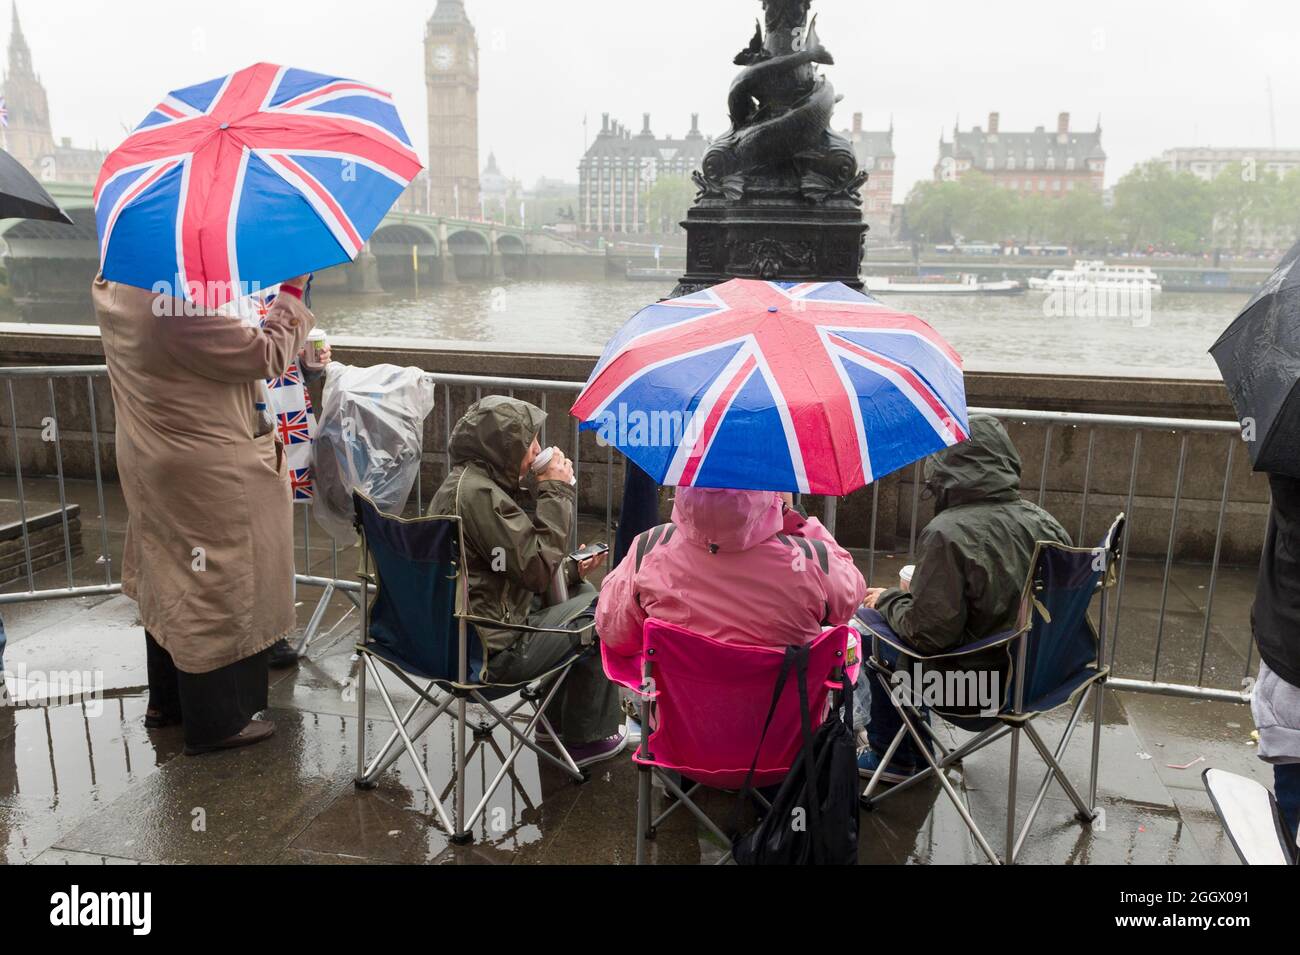 Spectators waiting under  Union Jack umbrellas in the rain for The Thames Diamond Jubilee Pageant to pass the South Bank, London. The Pageant was made up of hundreds of boats that sailed from Battersea Bridge to Tower Bridge to celebrate Queen Elizabeth II's 60 years on the throne. Millions of people lined the banks of the Thames to watch the spectacle.  South Bank, London, UK.  3 Jun 2012 Stock Photo